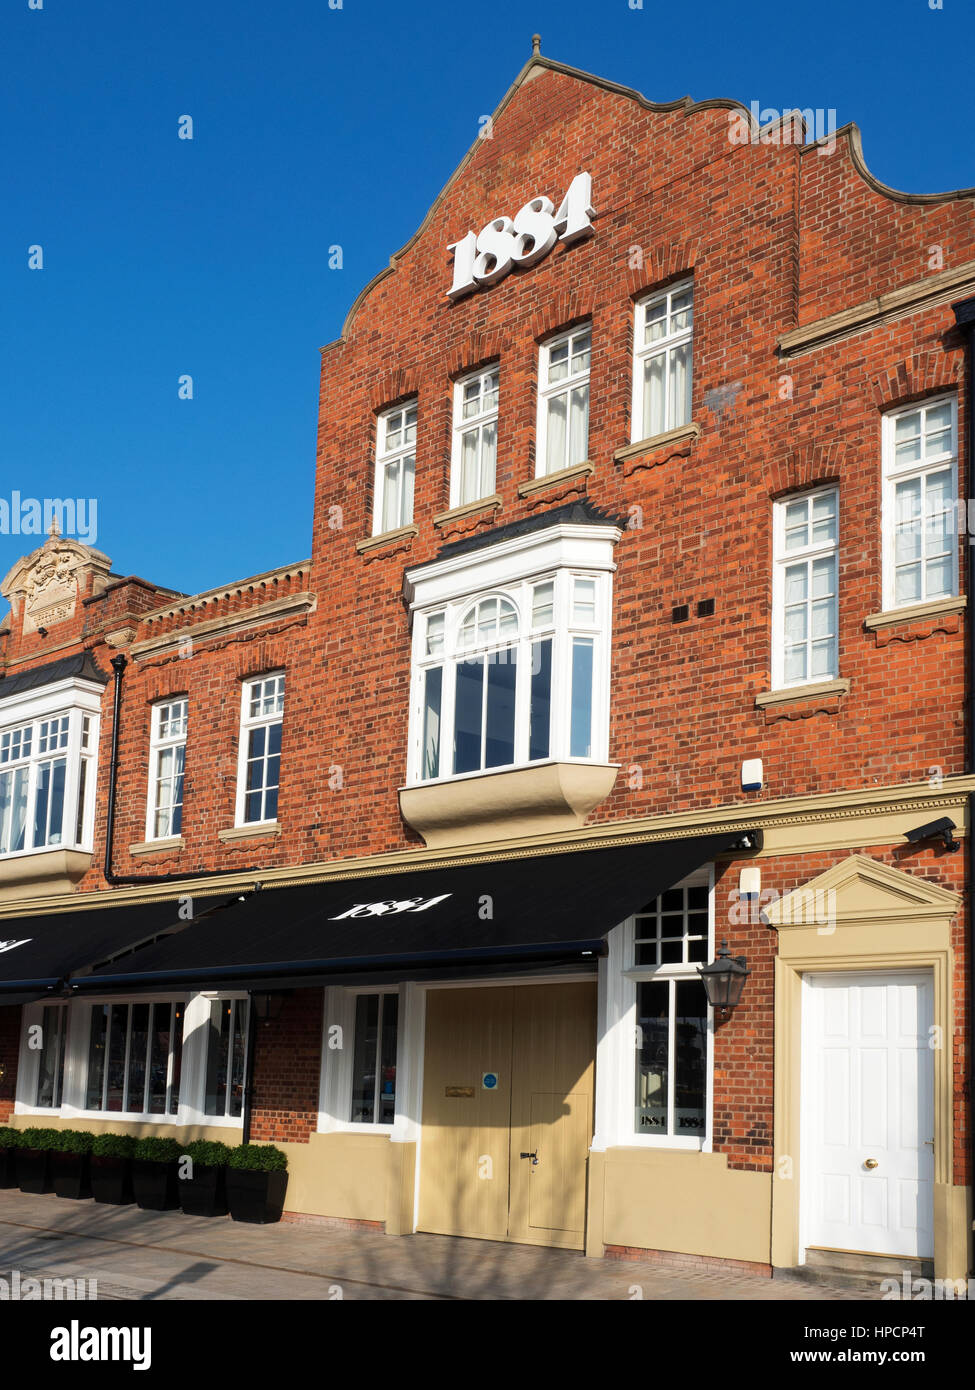 Hessle Gate Buildings Former Rope Factory now a Restaurant on Humber Dock Street Hull Yorkshire England Stock Photo